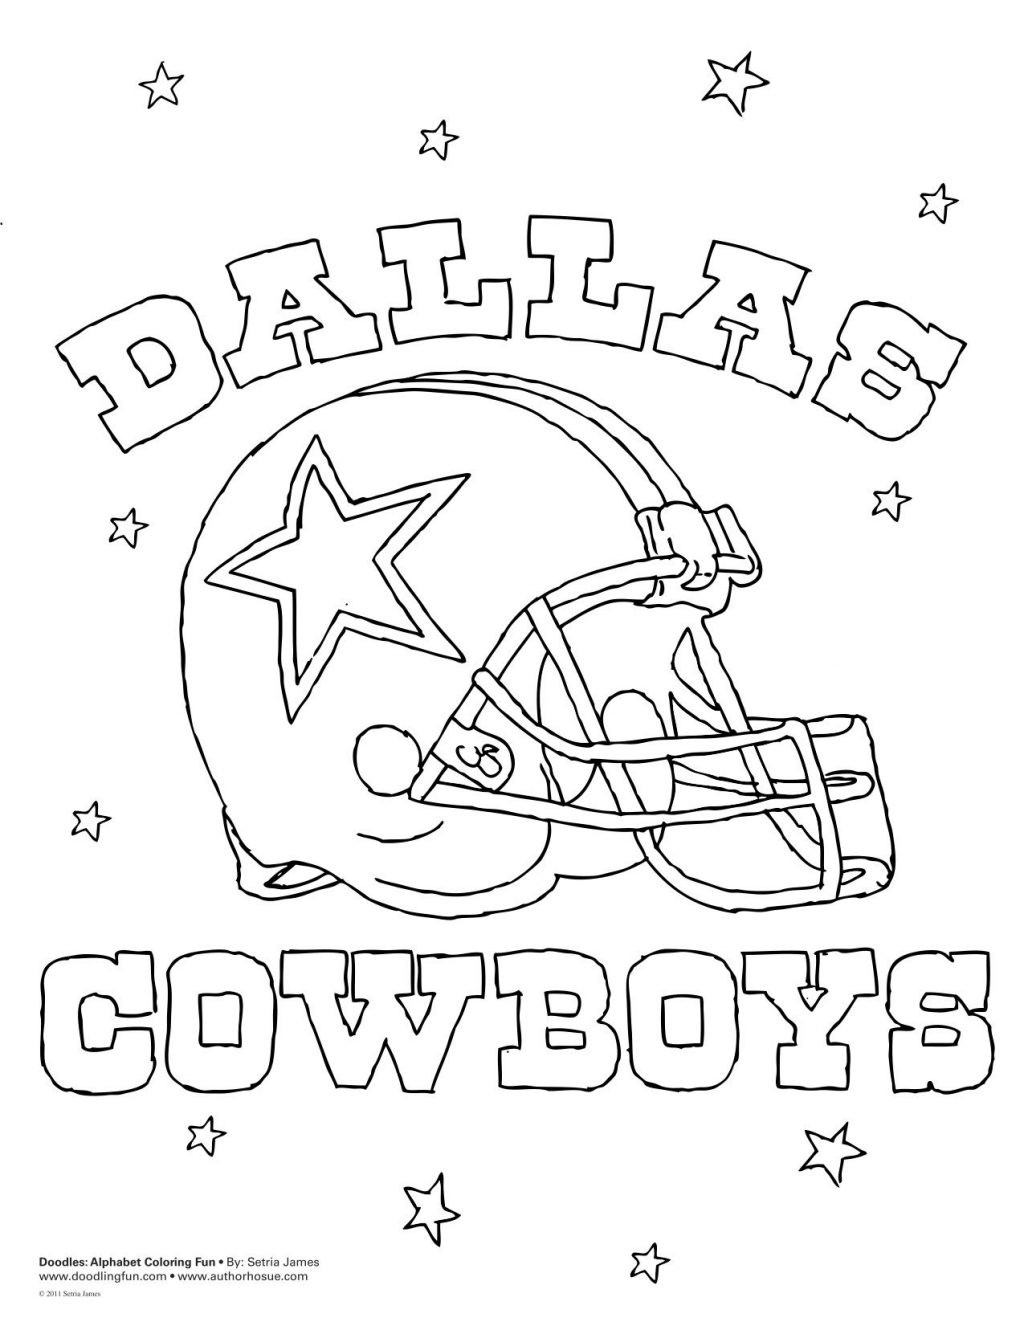 Cowboys Football Coloring Pages
 Coloring Remarkable Dallas Cowboys Coloring Pages